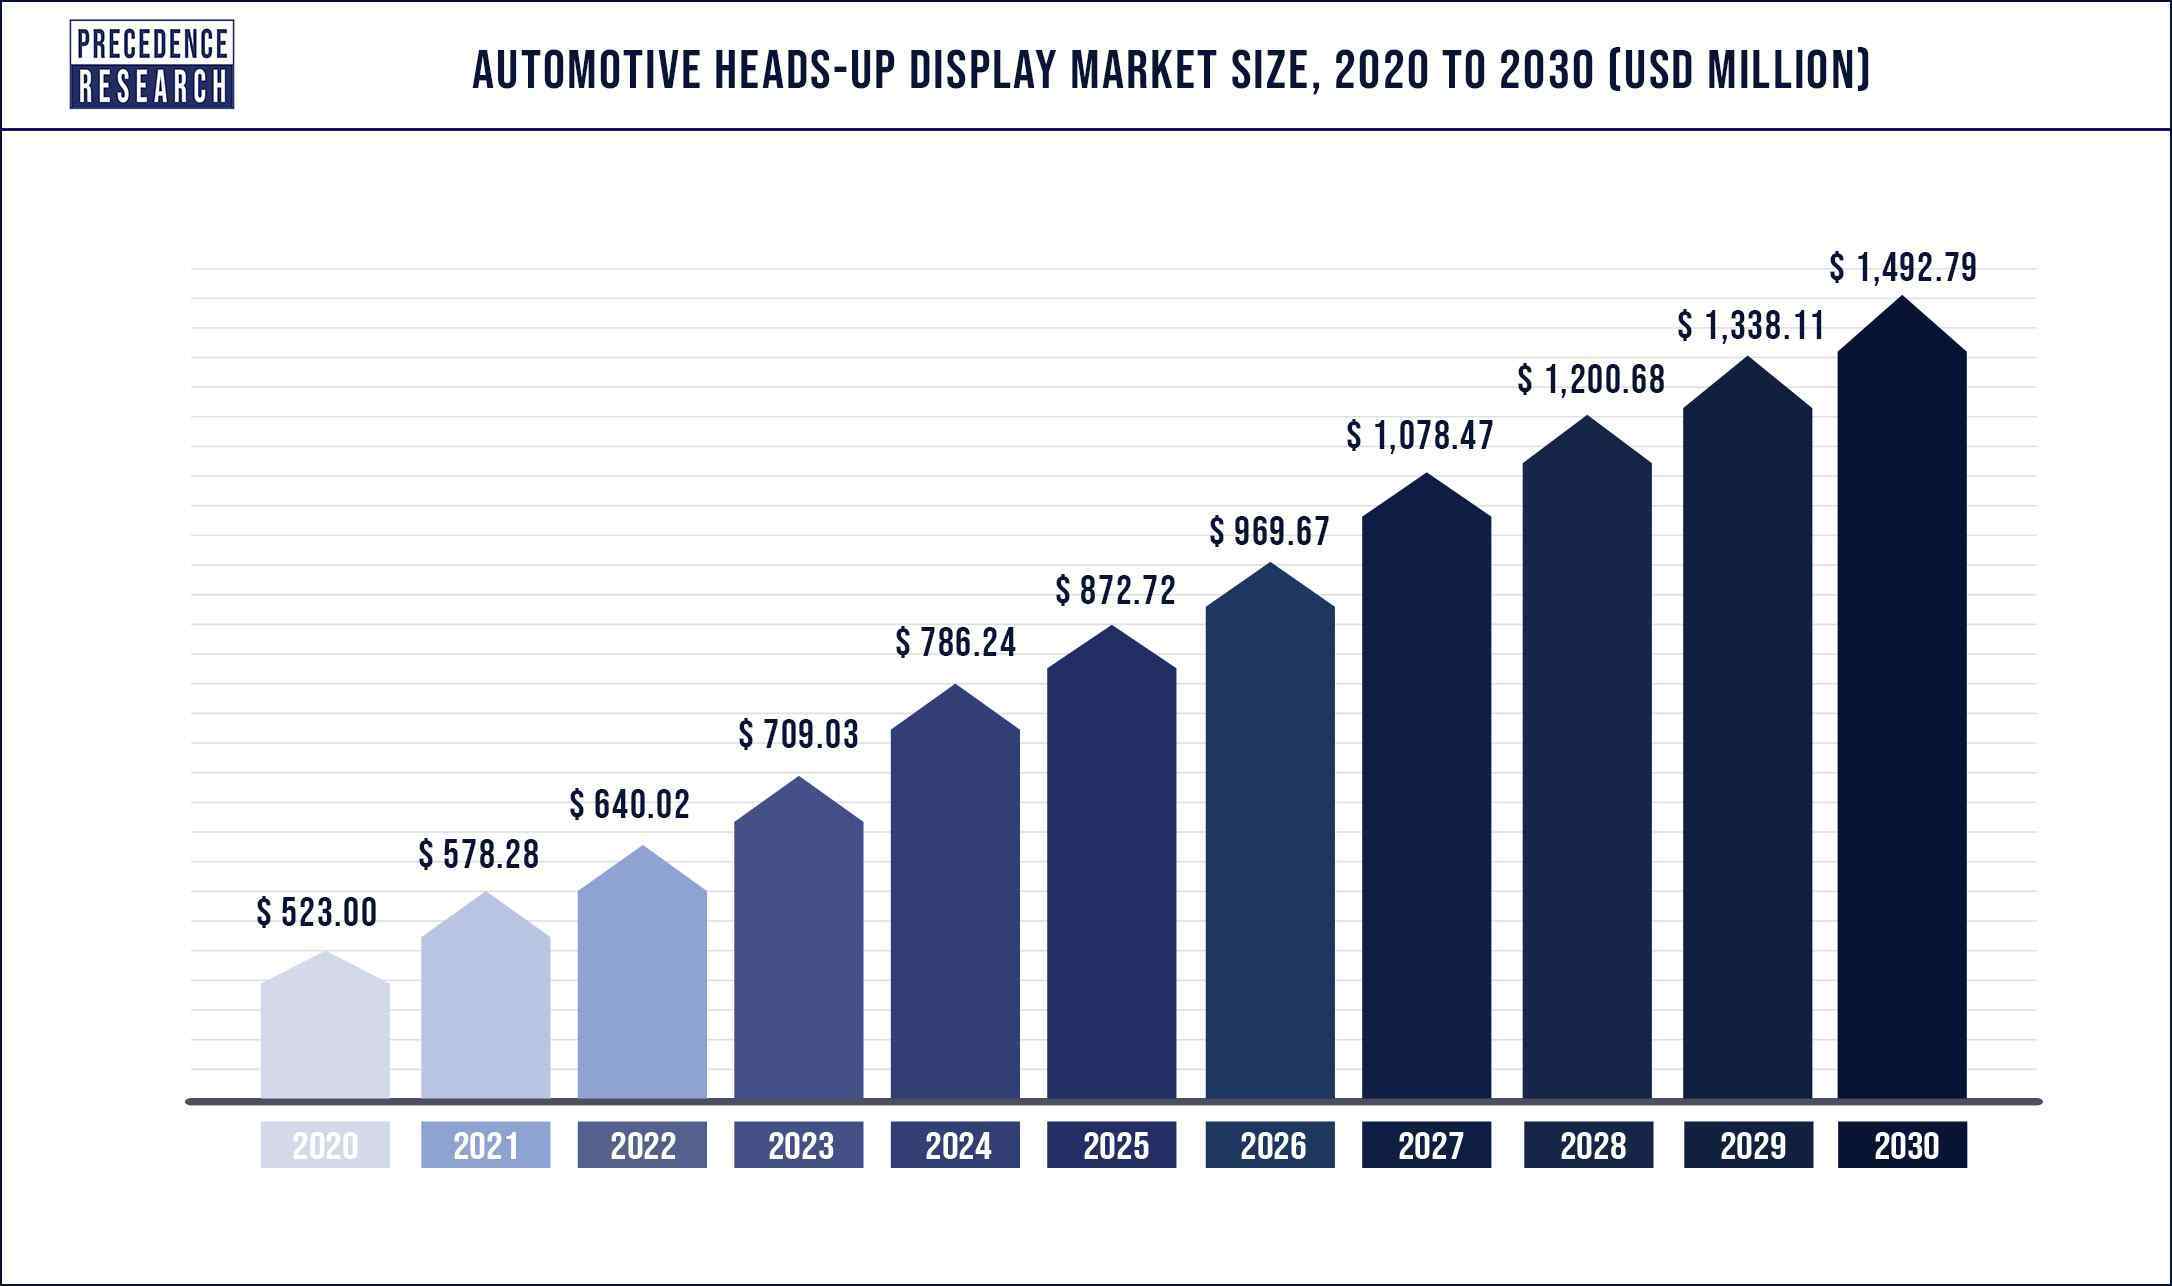 Automotive Heads-up Display Market Size 2020 to 2030